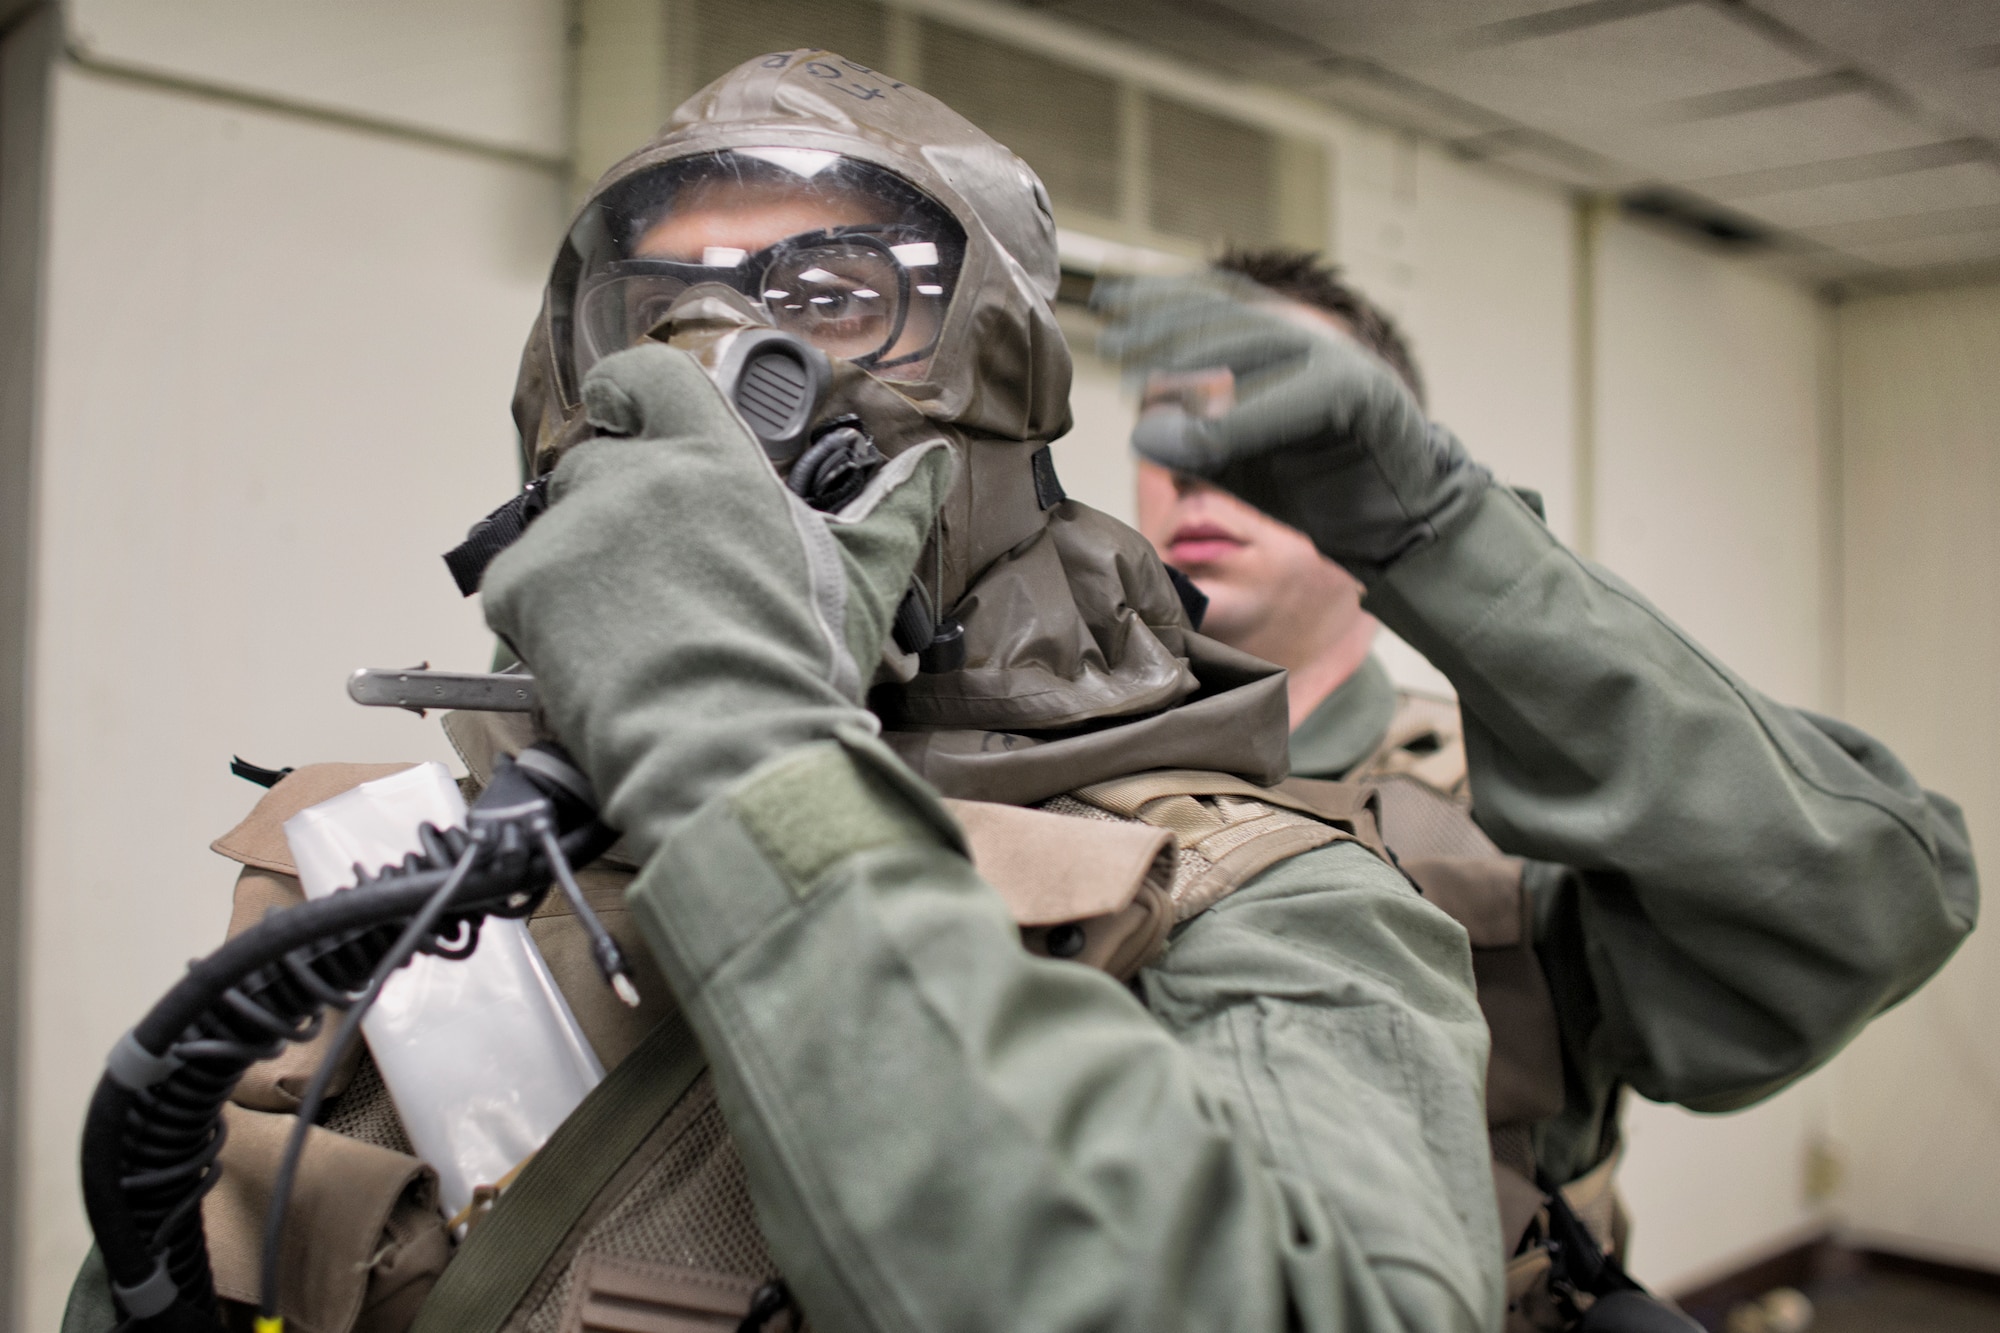 Aircrew from the 36th Airlift Squadron secures the straps on an Aircrew Eye and Respiratory Protection System during a Samurai Readiness Inspection at Yokota Air Base, Japan, May 20, 2015. Airmen from the 36th AS and 374th Operations Support Squadron performed aircrew decontamination procedures with the Lightweight Inflatable Decontamination System (LIDS). The LIDS takes about 20 minutes to set up and consists of four stations for rinsing off excess chemicals and a process to dispose of contaminated clothing and aircrew equipment. (U.S. Air Force photo by Osakabe Yasuo/Released)